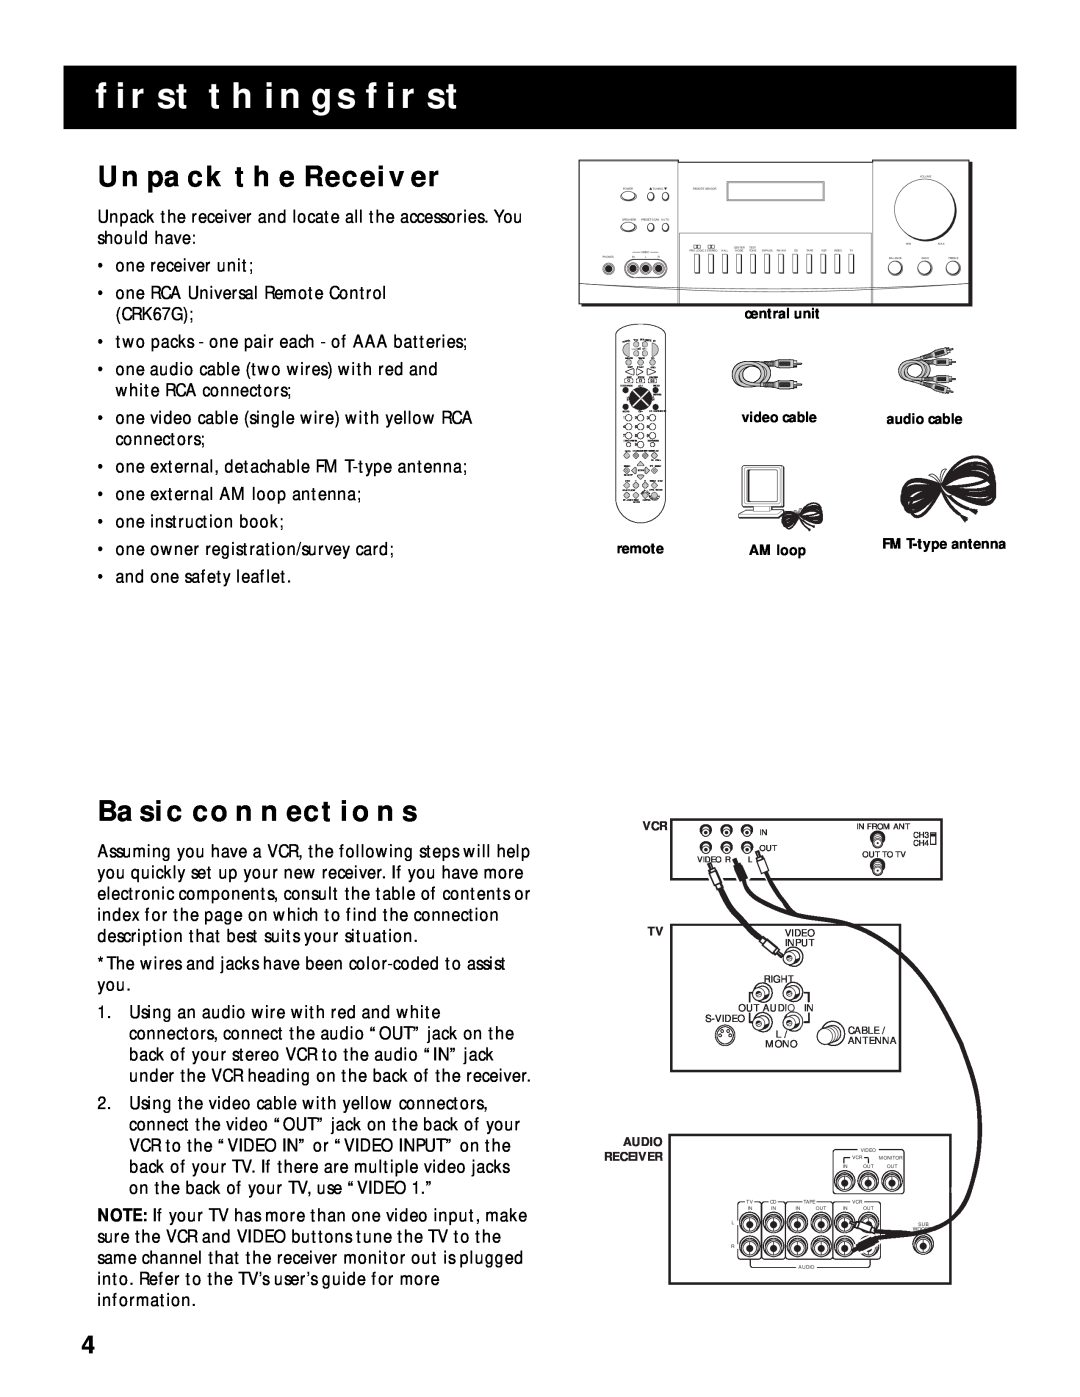 RCA RV-9968, RV-9978 manual First Things First, Unpack The Receiver, Basic Connections 